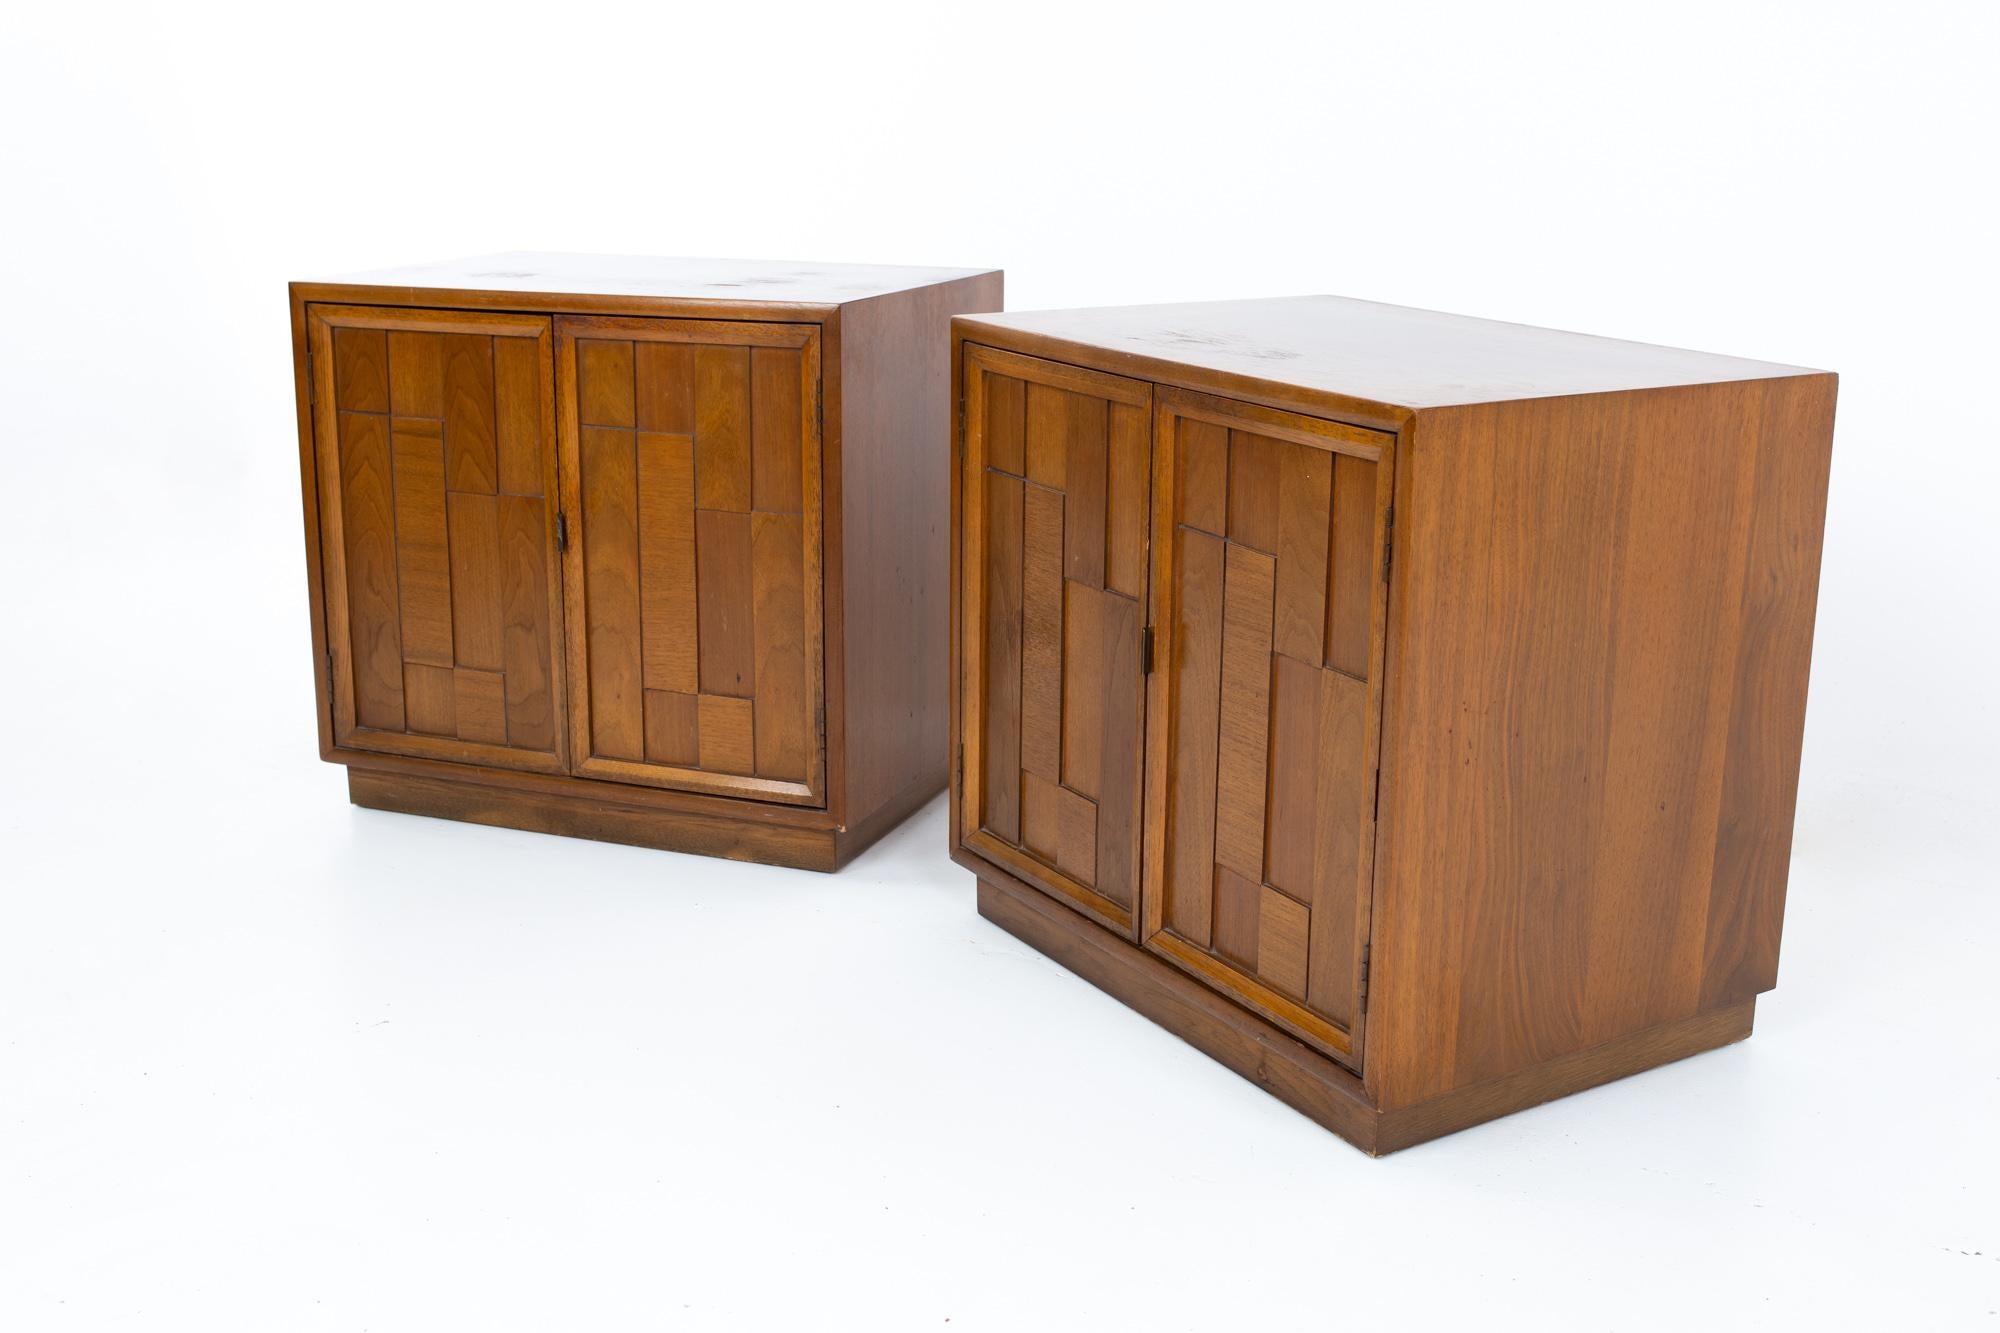 Kroehler Brutalist mid century walnut patchwork nightstands - pair
Each nightstand measures: 24.5 wide x 17 deep x 22 inches high

All pieces of furniture can be had in what we call restored vintage condition. That means the piece is restored